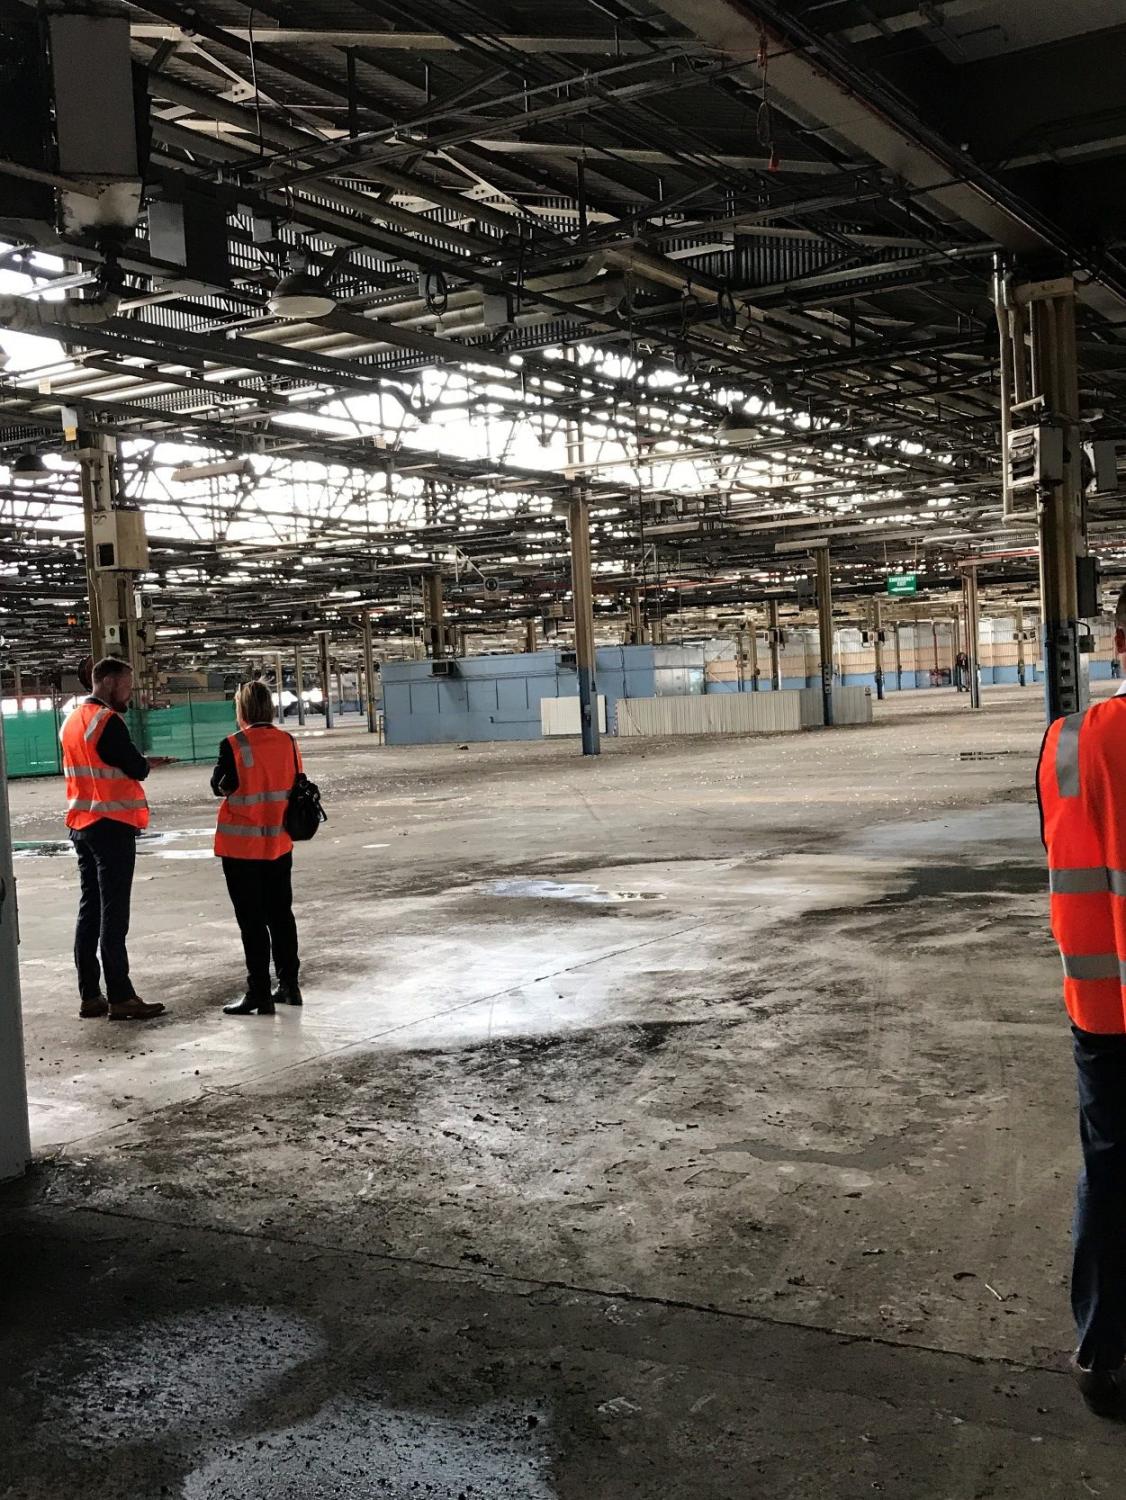 Touring Fishermans Bend. Creating an authentic industrial flex space for start-ups and scale-ups could help generate a “critical mass” of workers in a walkable radius. Photo: Julie Wagner